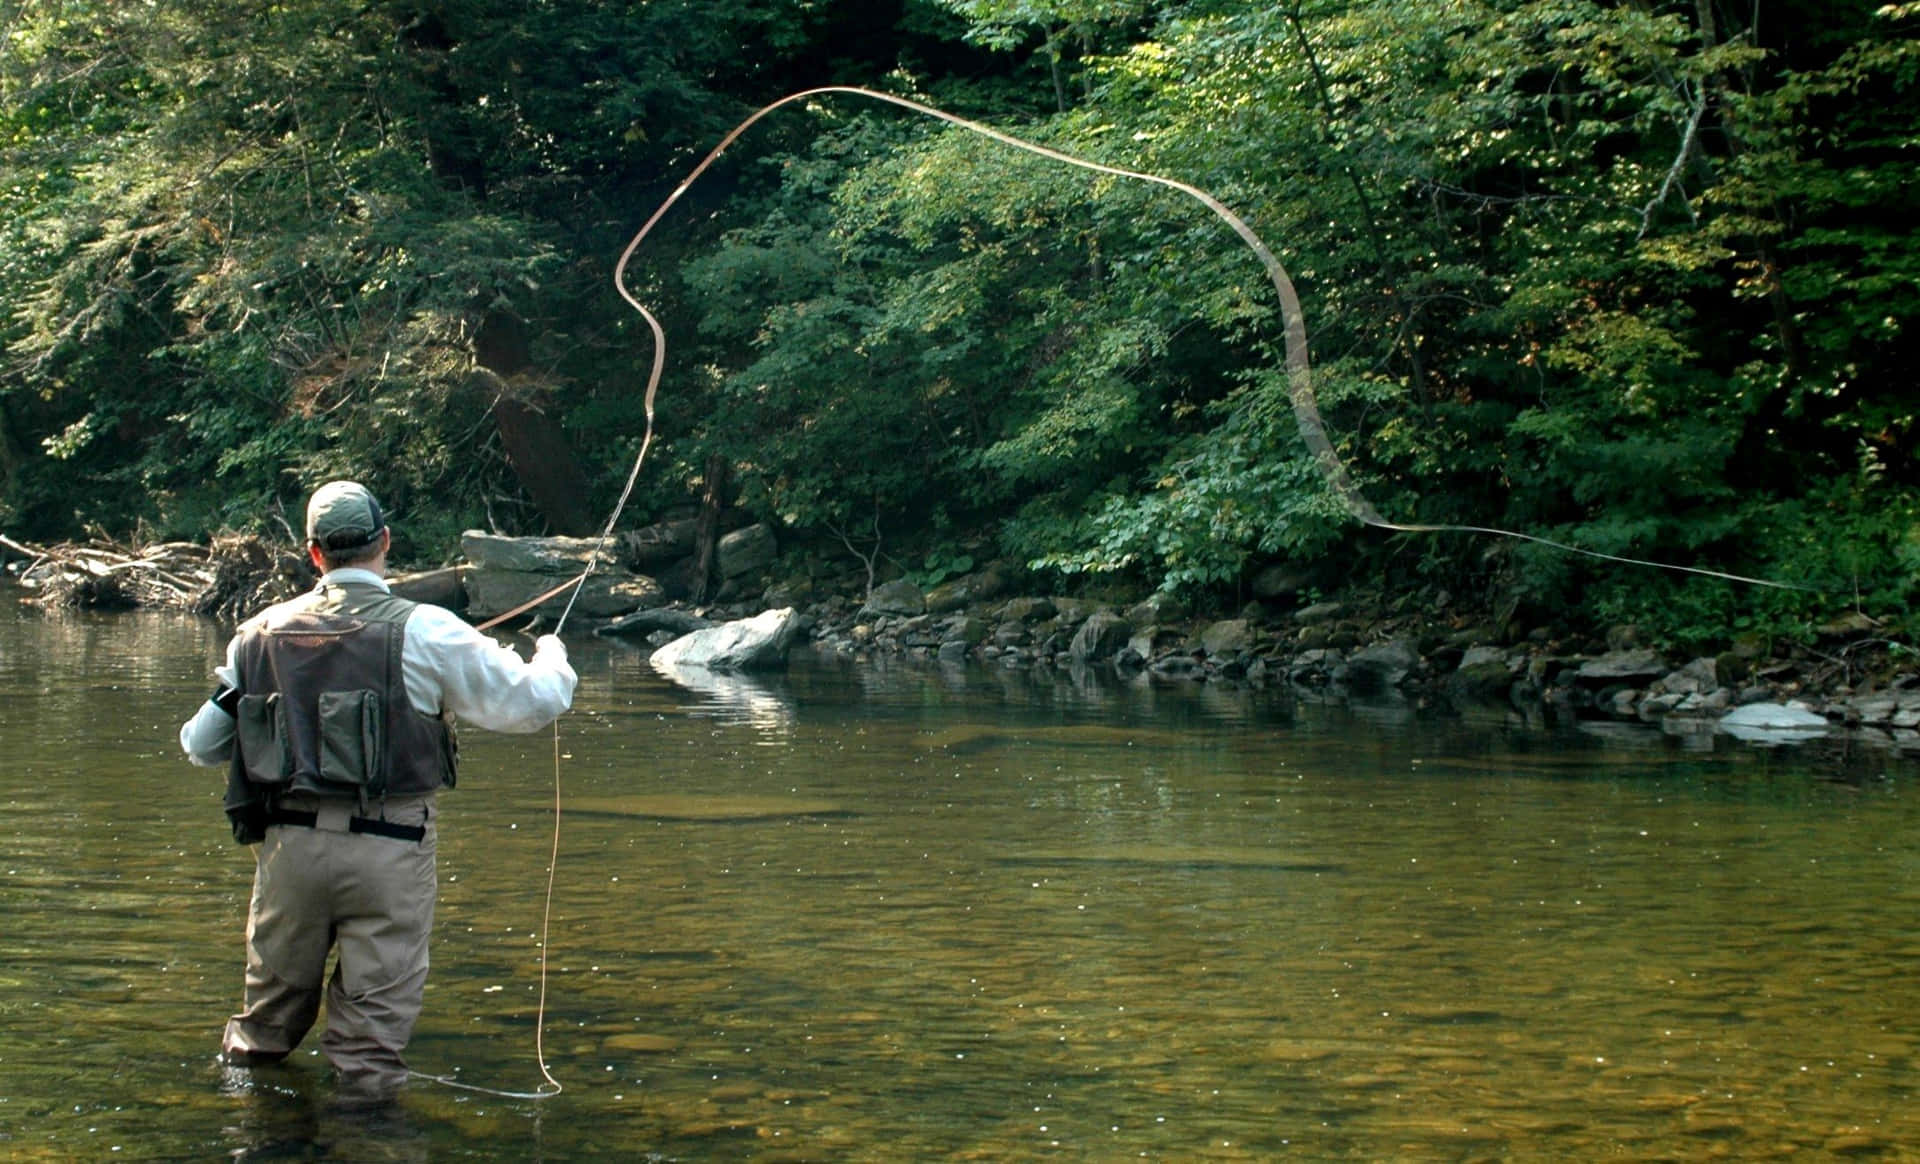 An Angler Enjoys a Day Fly Fishing Wallpaper